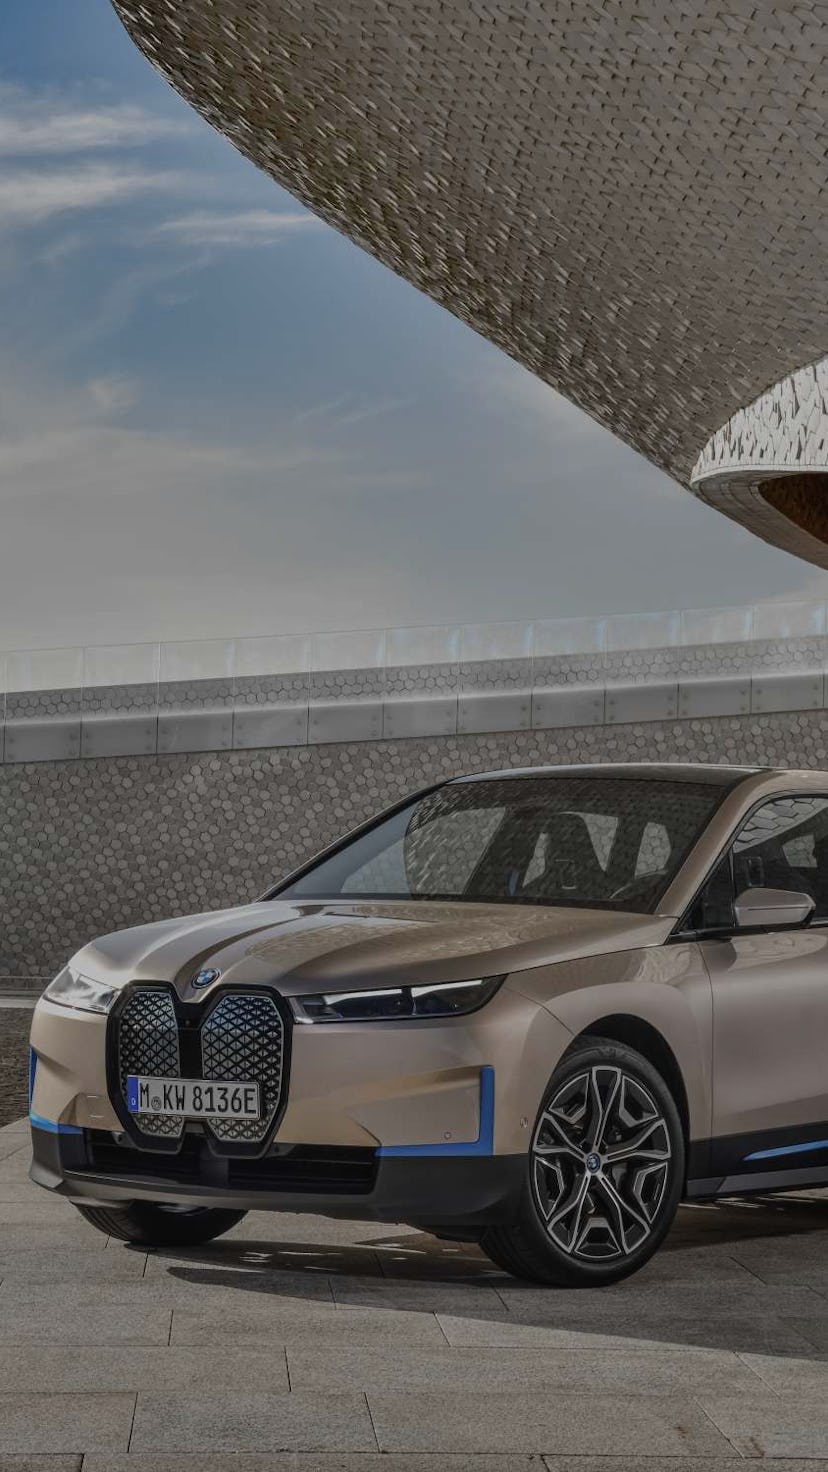 BMW's iX is an all-electric SUV and a template for the company's future electric vehicles.